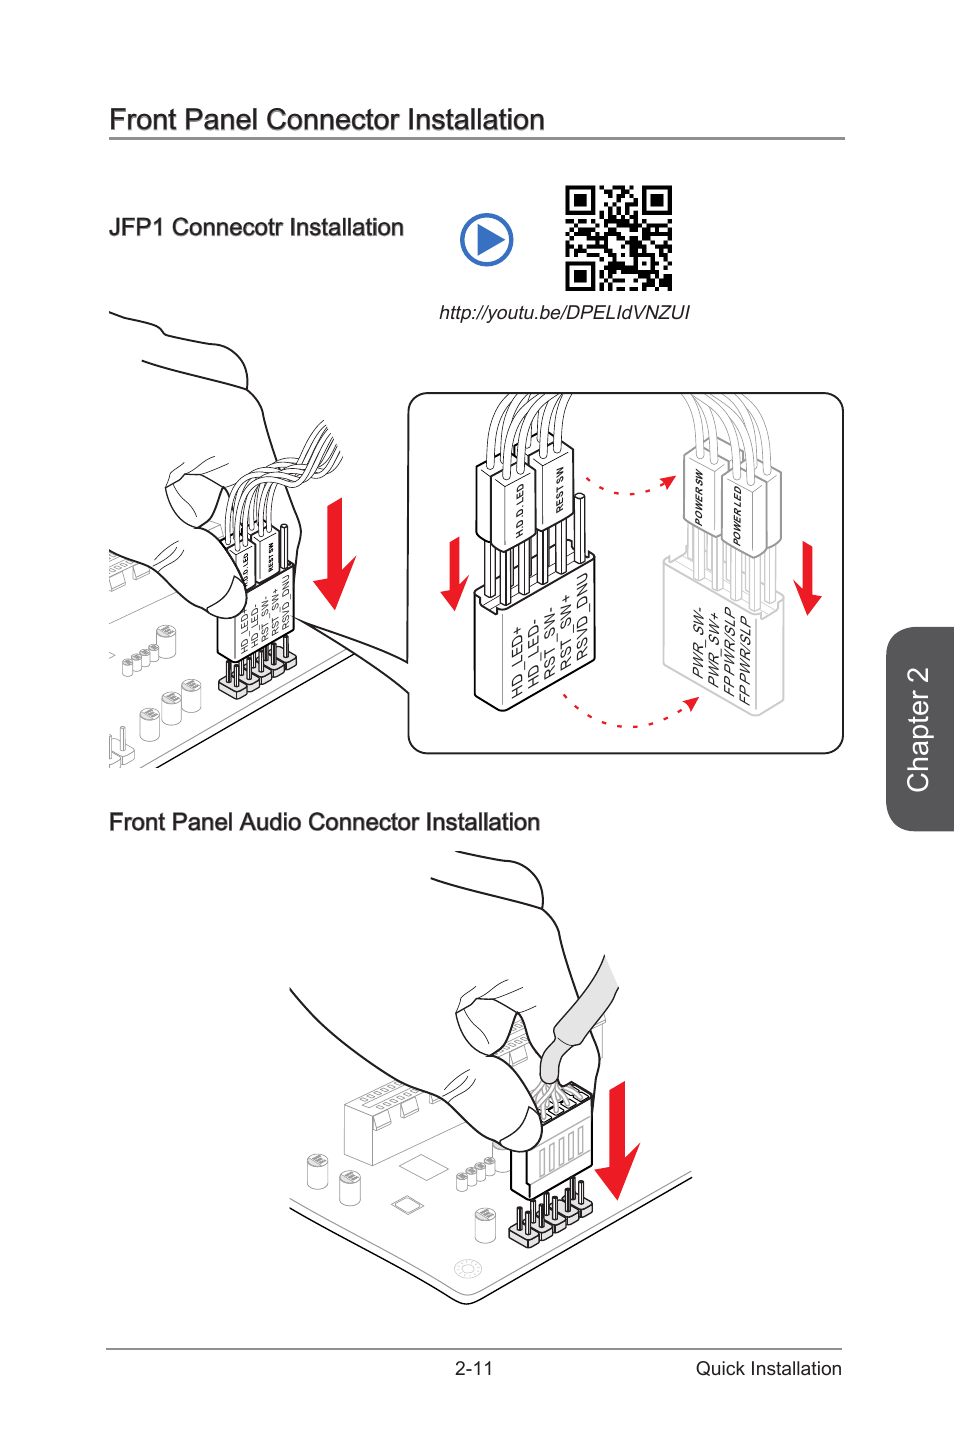 Front panel connector installation, Jfp1 connecotr installation, Front  panel audio connector installation | MSI B85-G41 PC Mate User Manual | Page  55 / 104 | Original mode